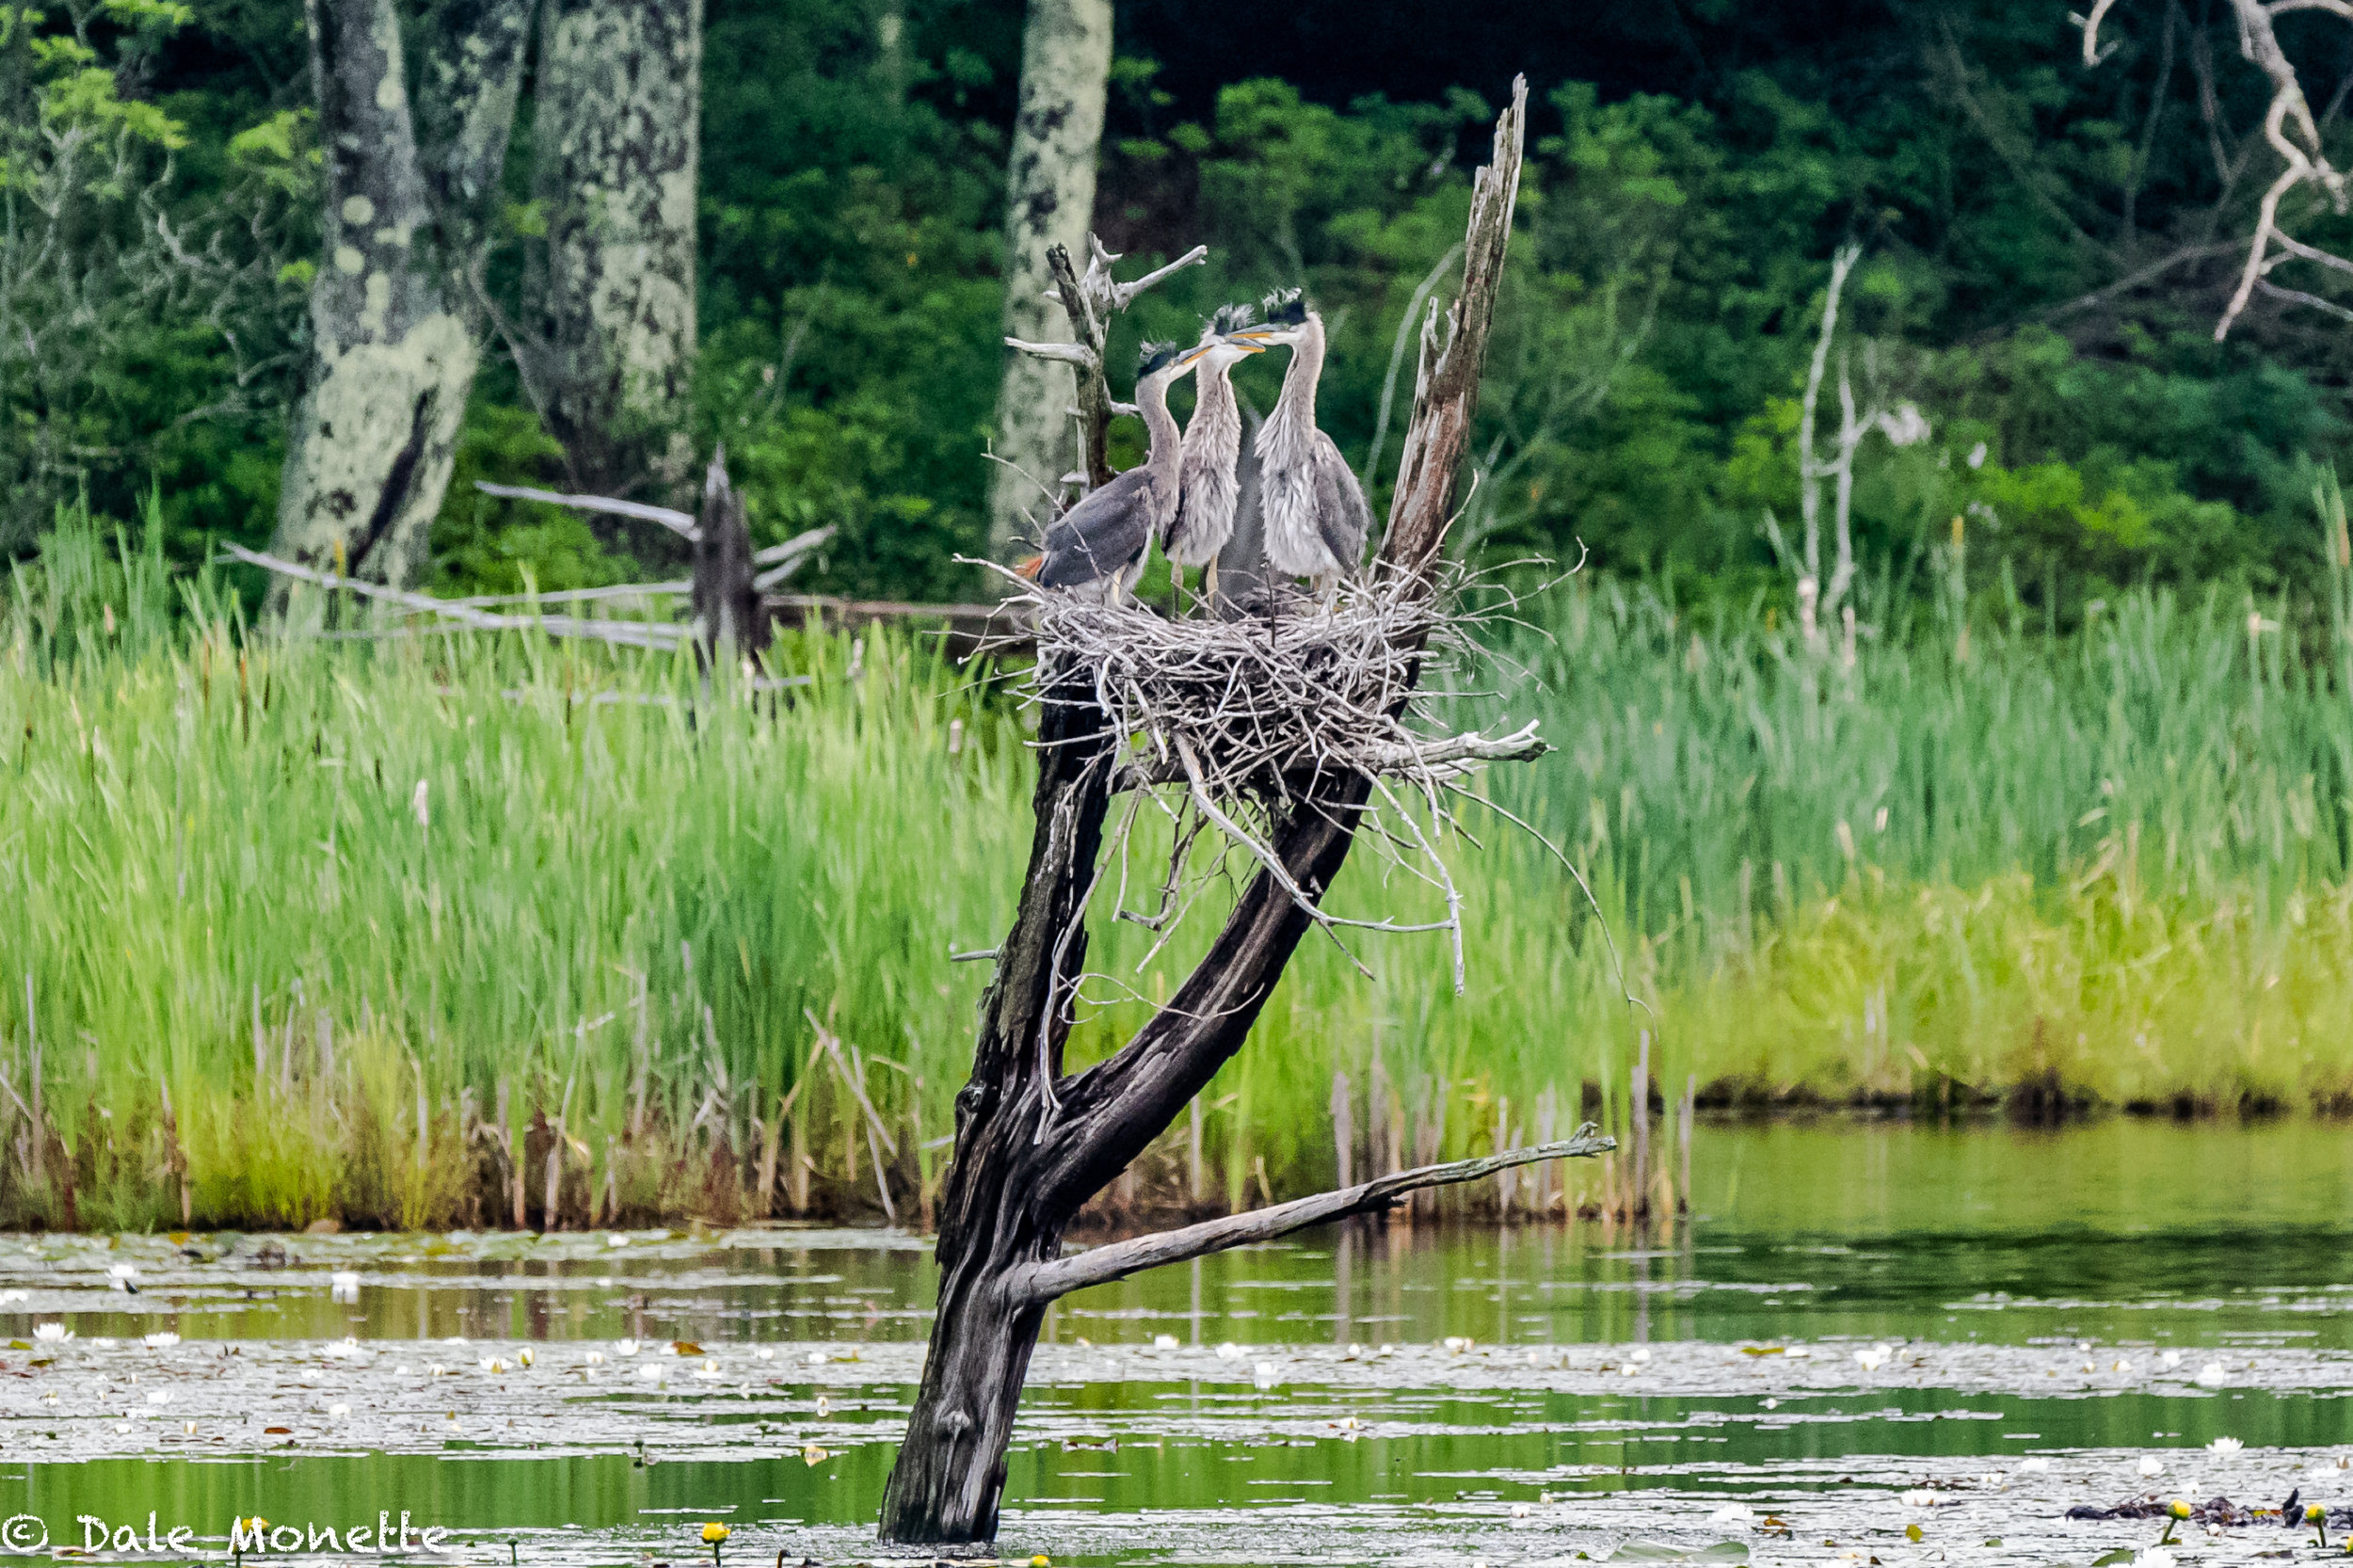   With the hot 90+ degree week coming up I hope these 3 great blue heron chicks fledge the nest in the next day or 2.  It will get mighty hot setting in the sun all day long.  